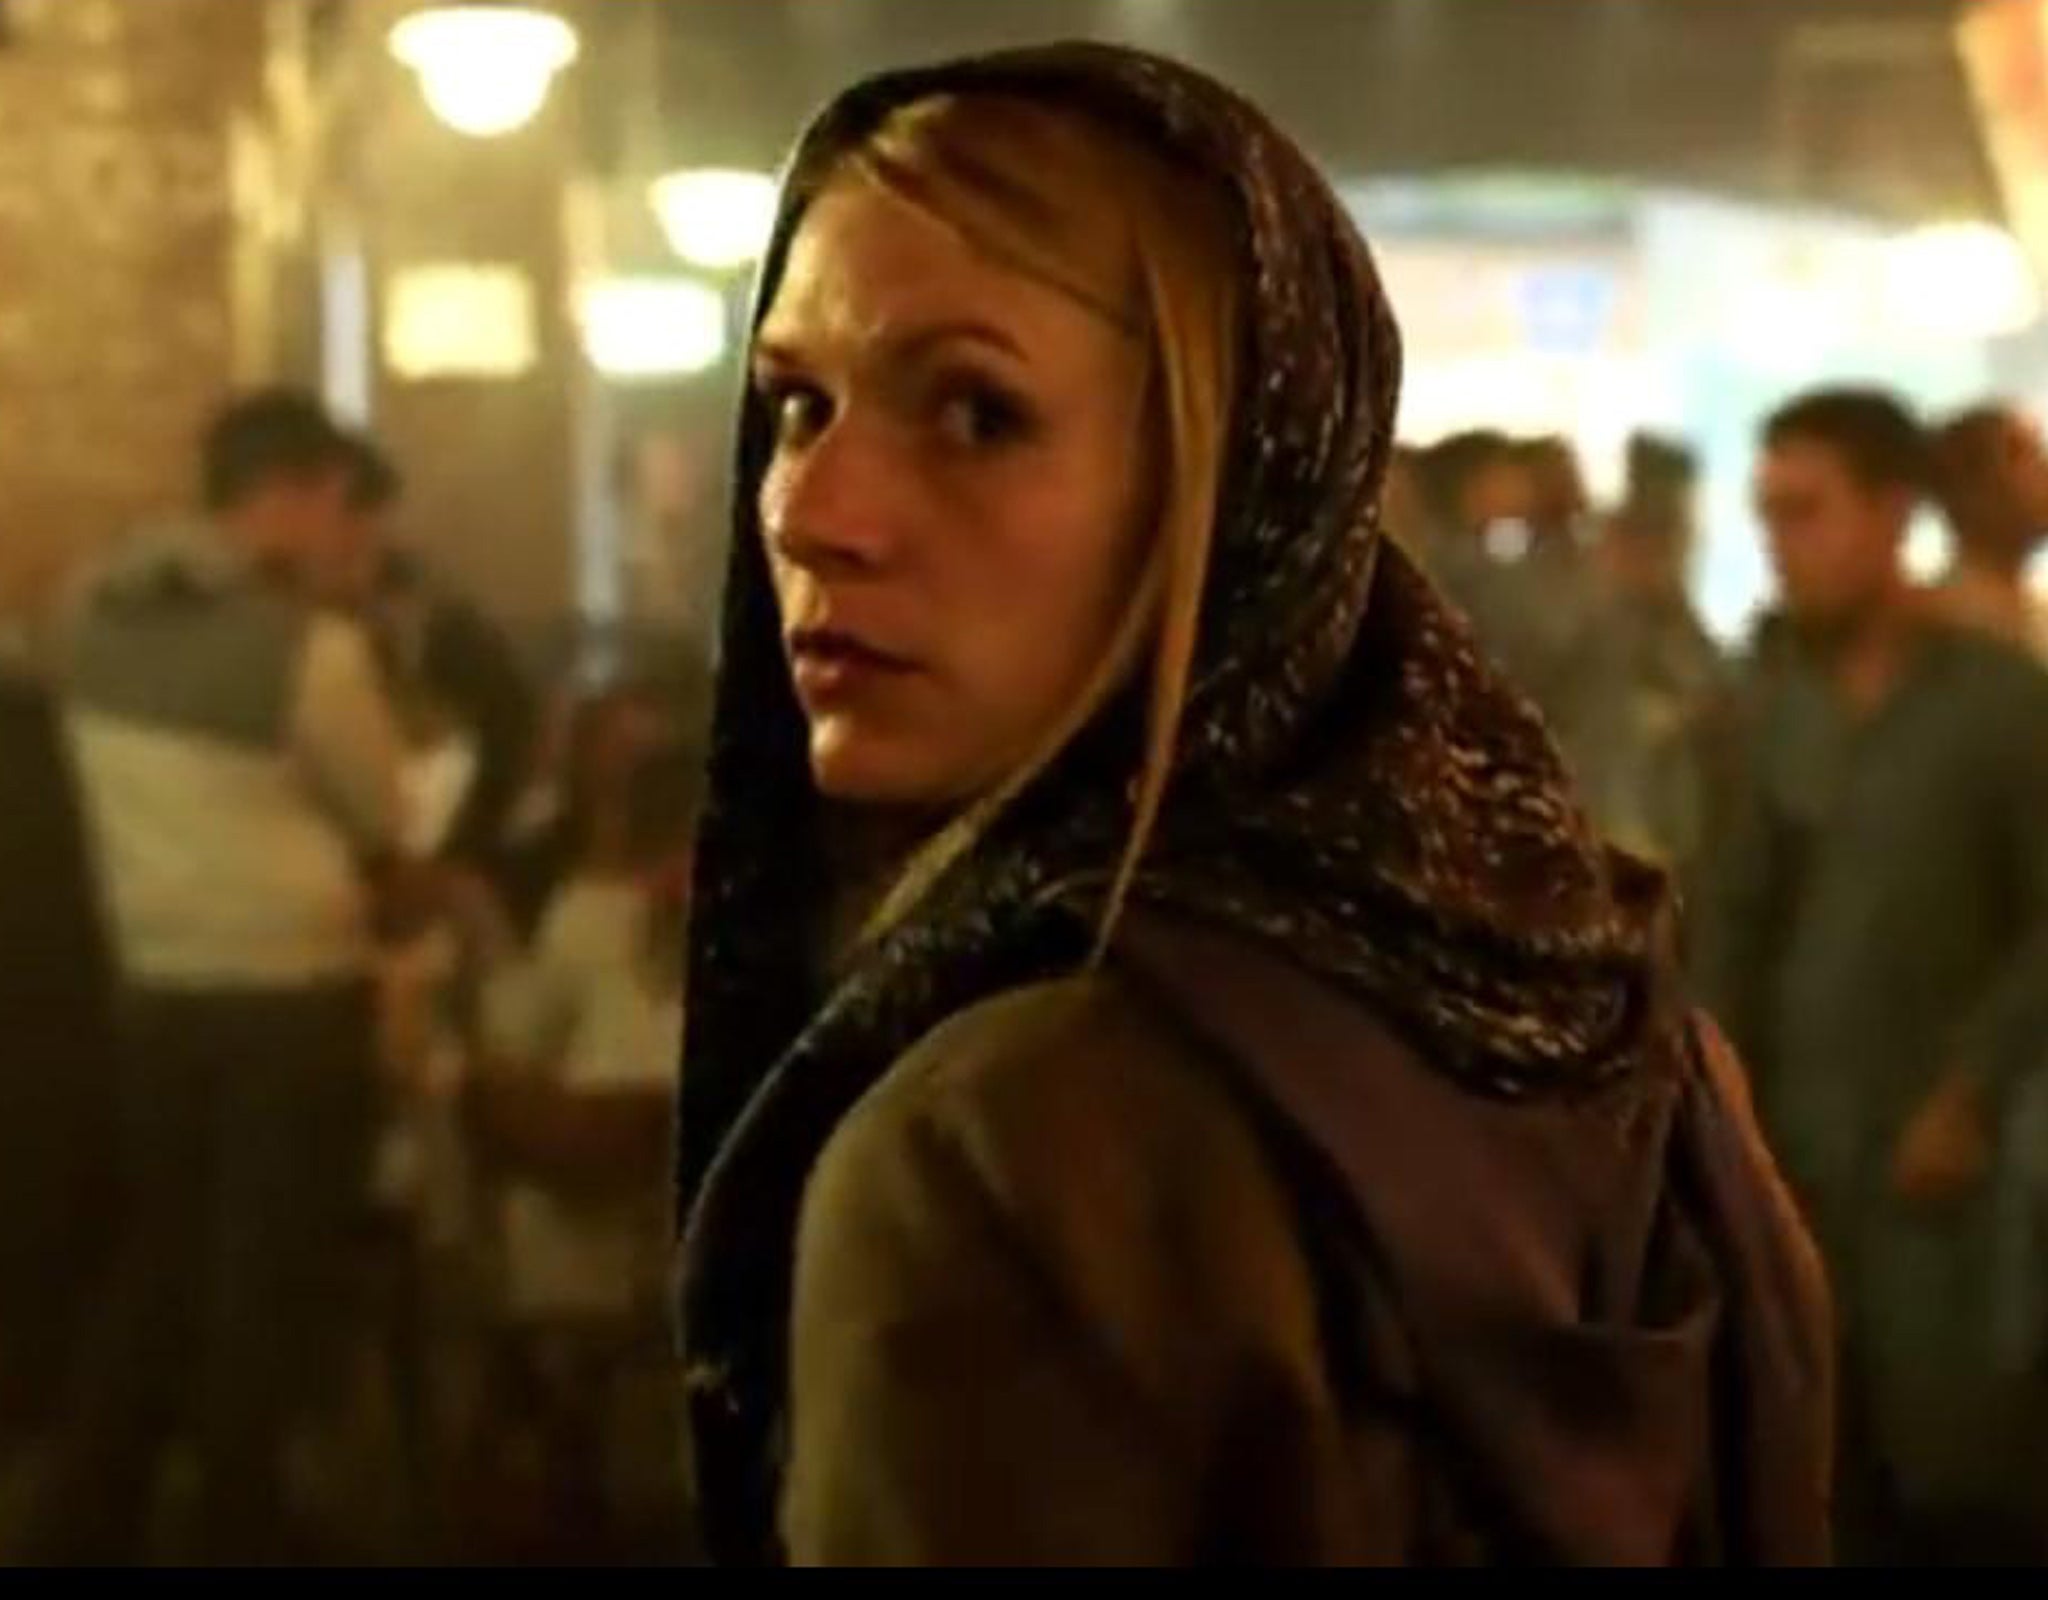 Carrie Mathison is season four of Homeland, where she returns to a CIA posting in Pakistan